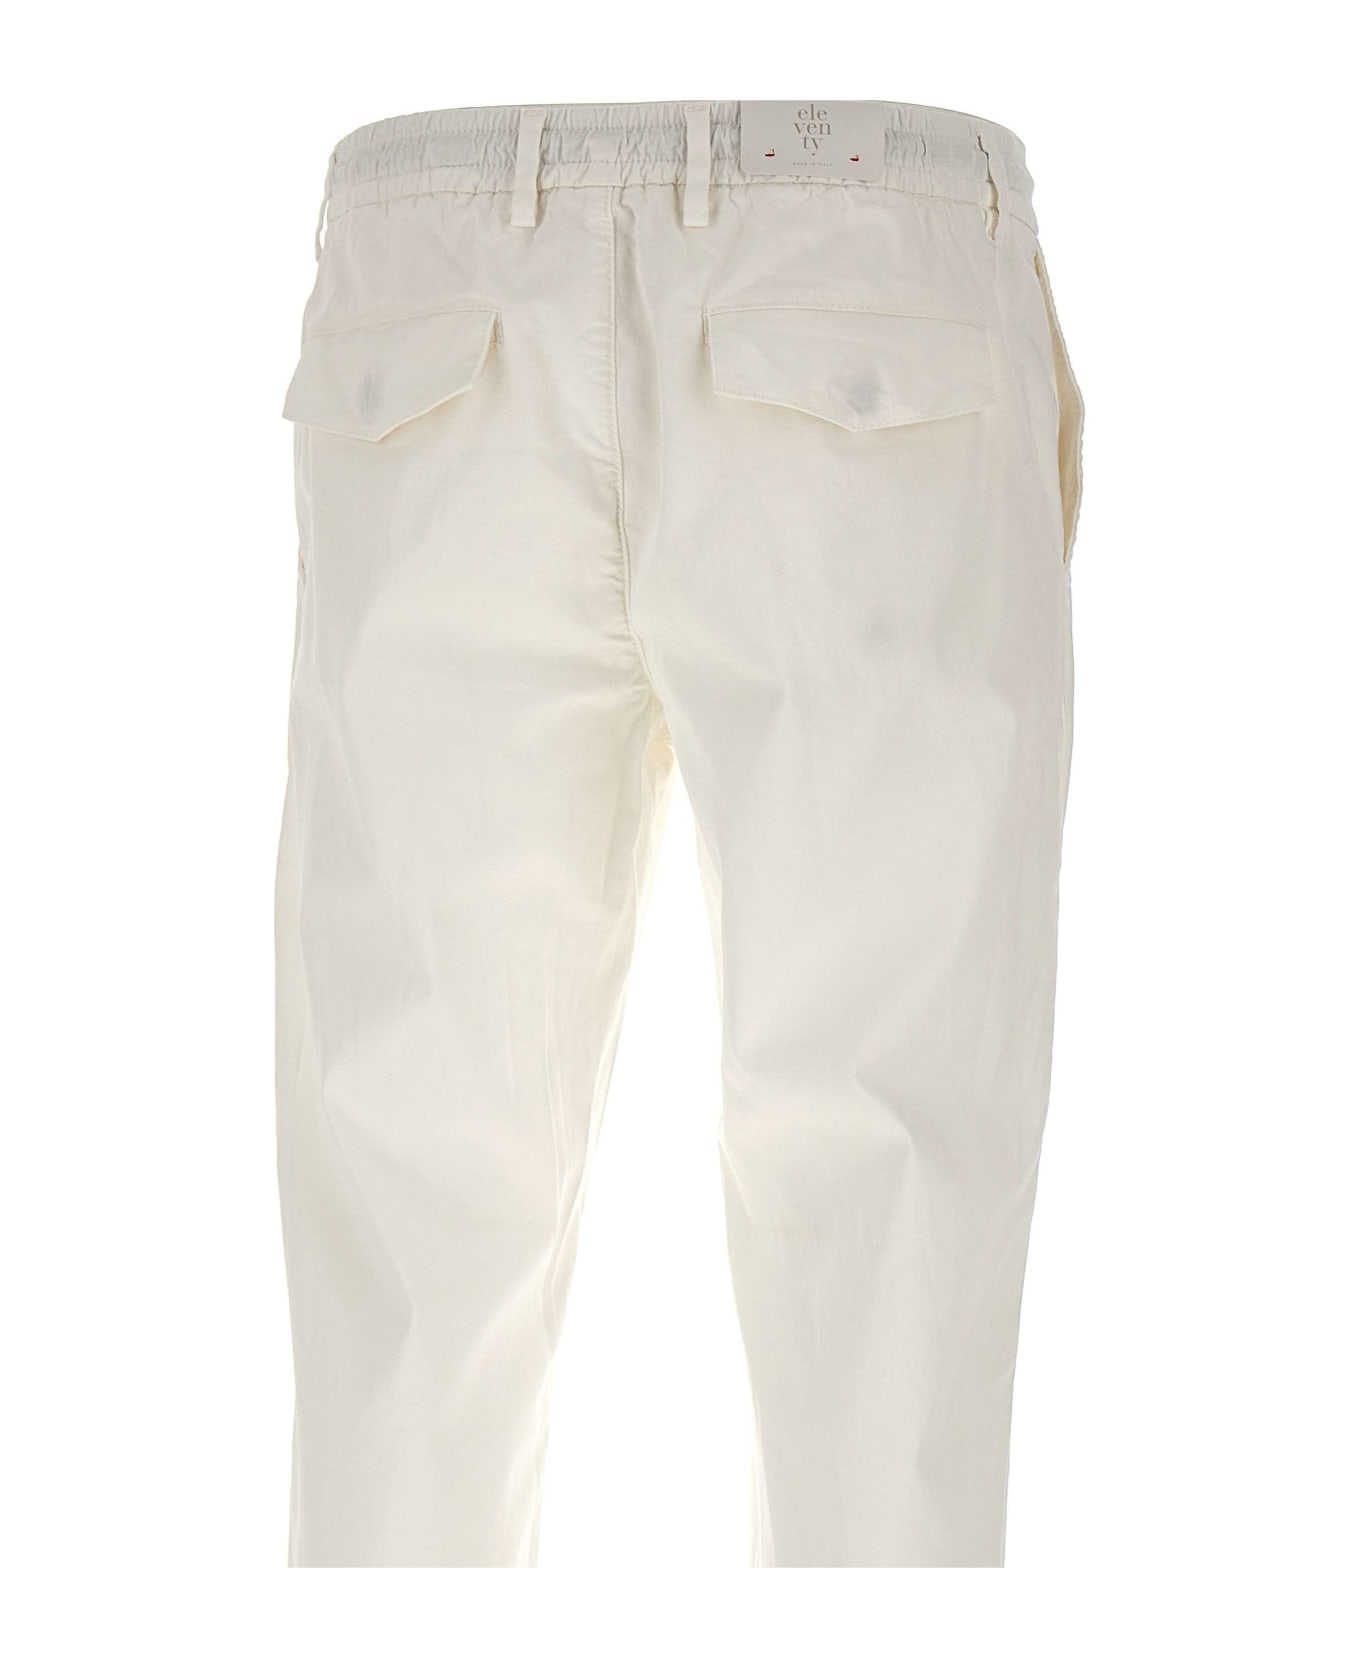 Eleventy Stretch Cotton Trousers - WHITE ボトムス